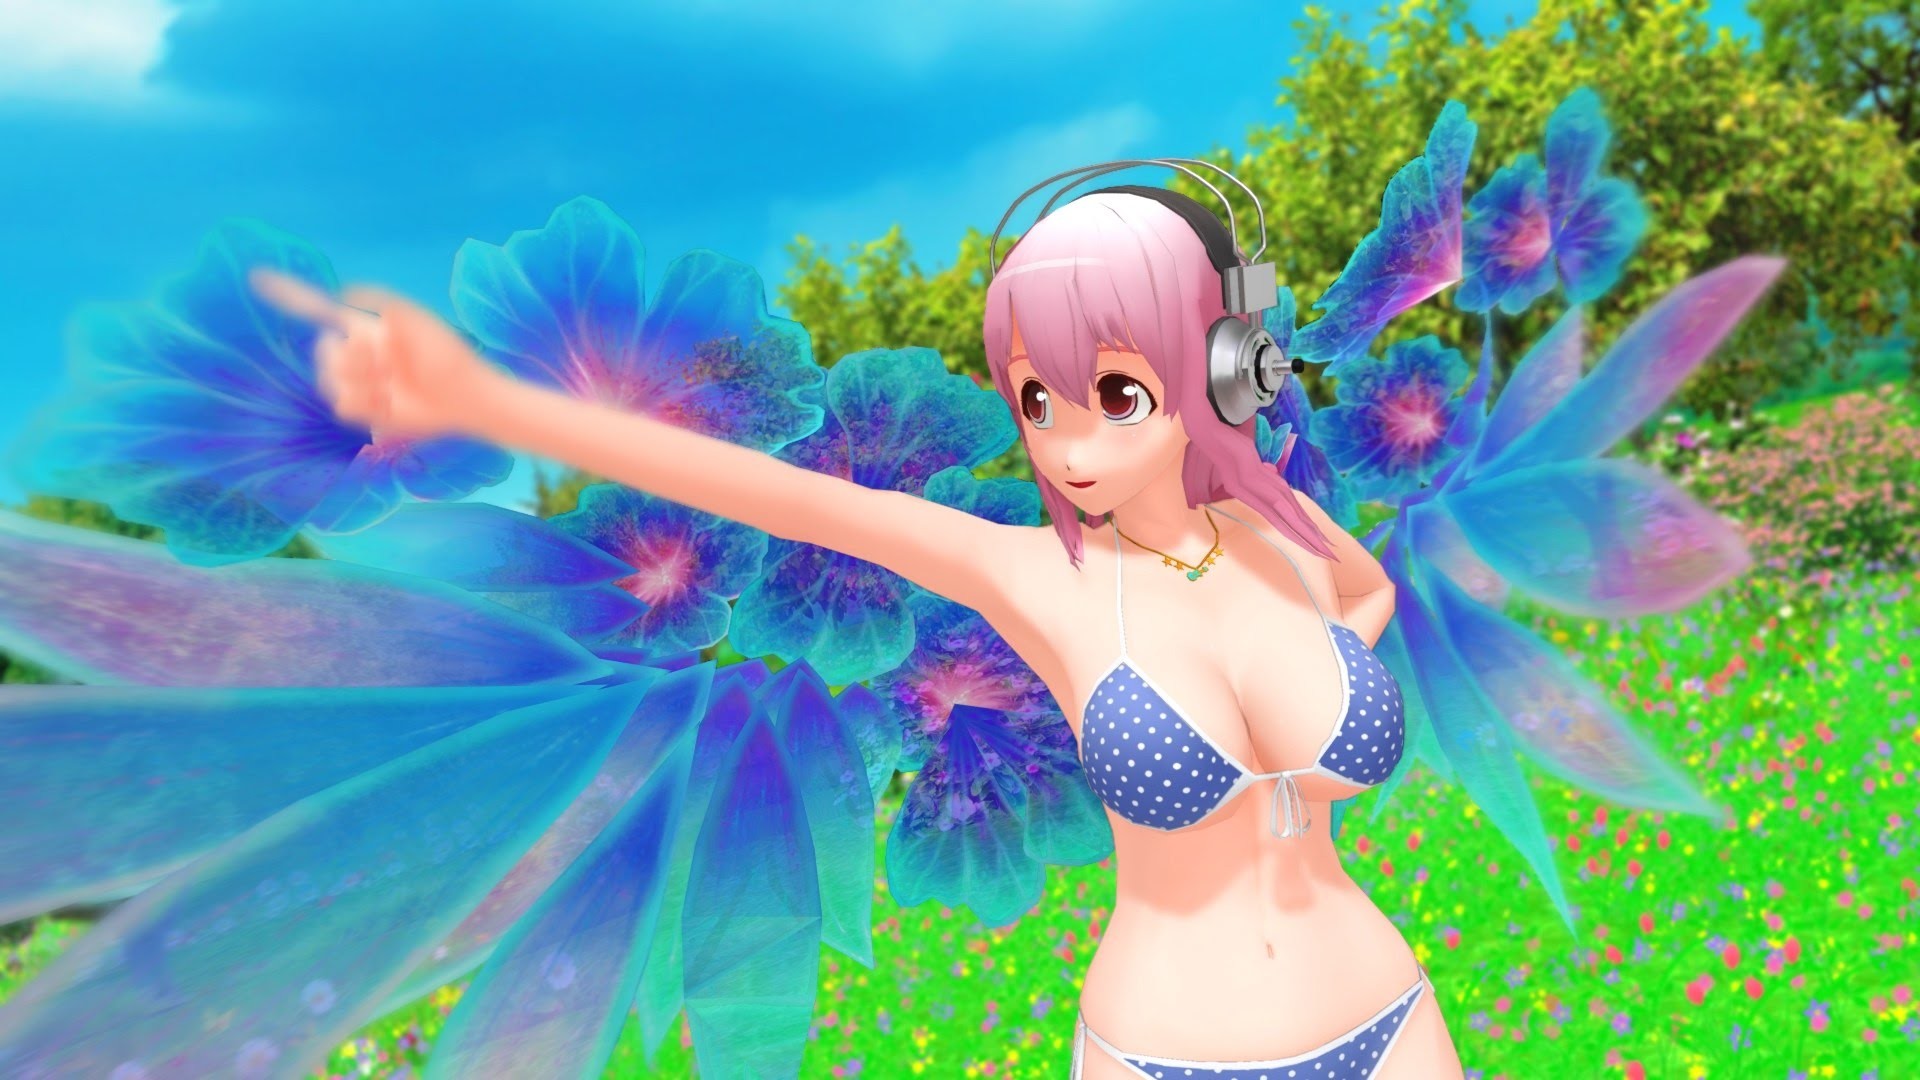 MMD Super Sonico DanceSeries From Y to Y 1080p60fps – YouTube